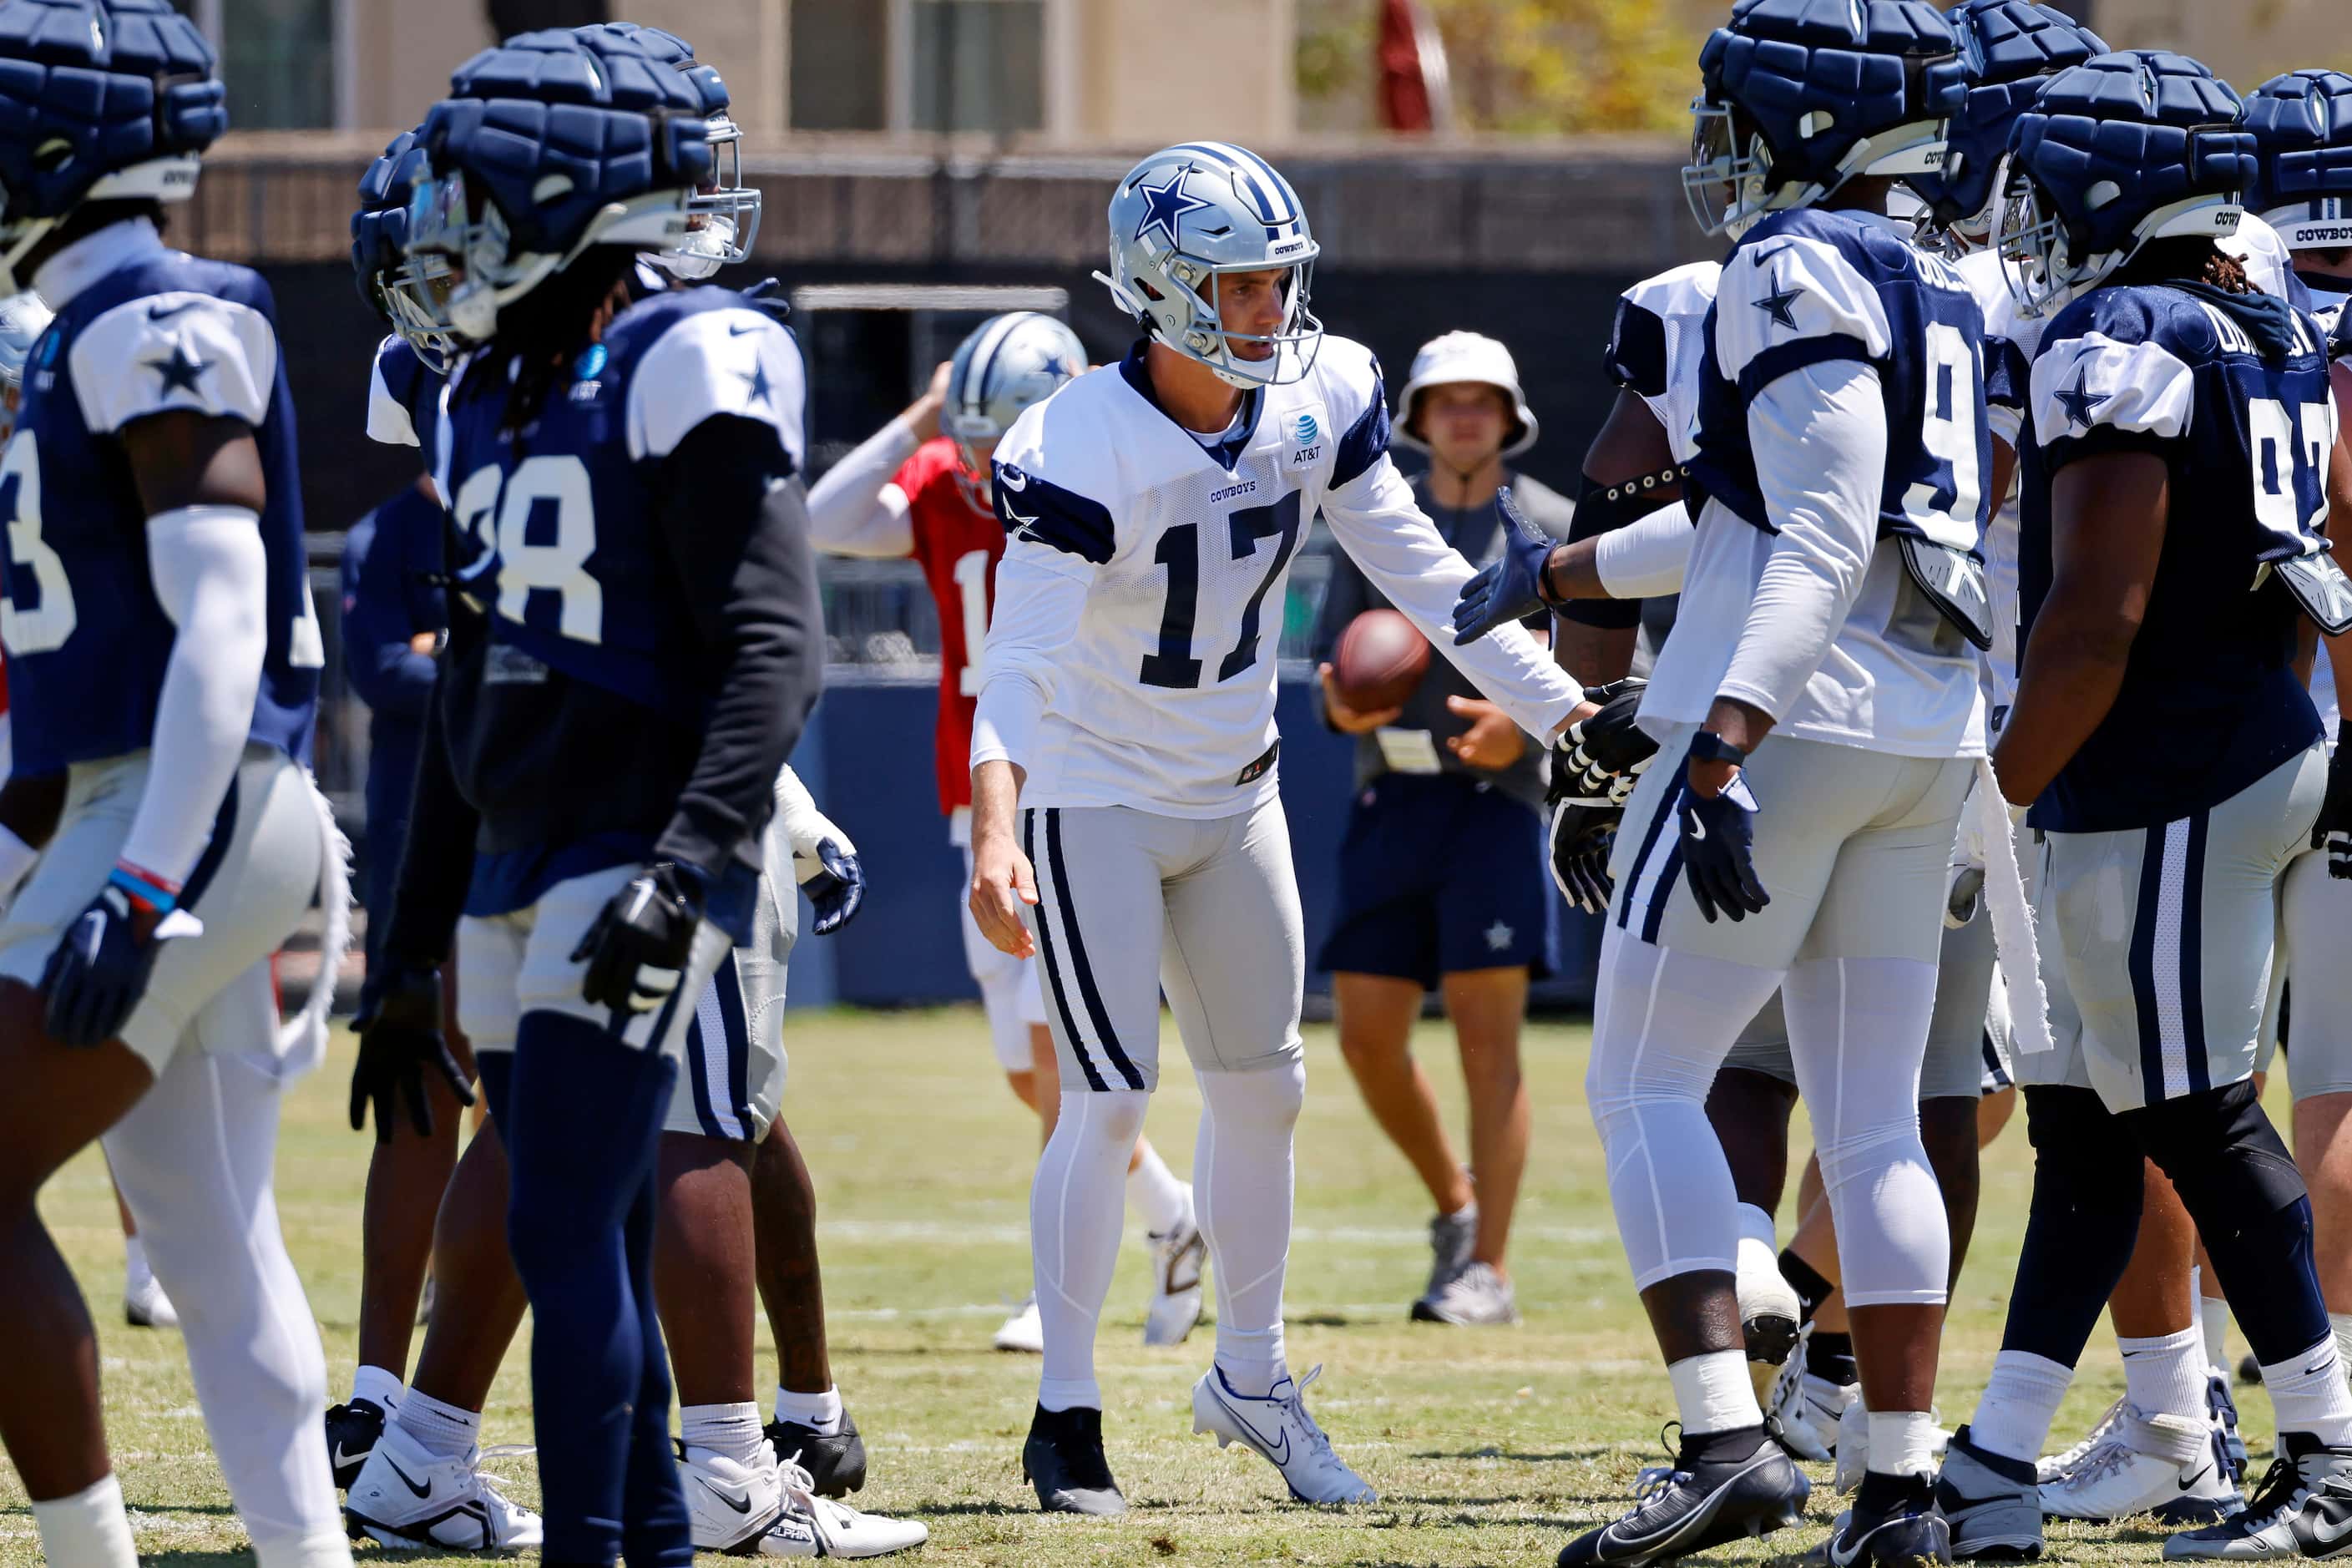 Dallas Cowboys place kicker Brandon Aubrey (17) is congratulated after kicking and making a...